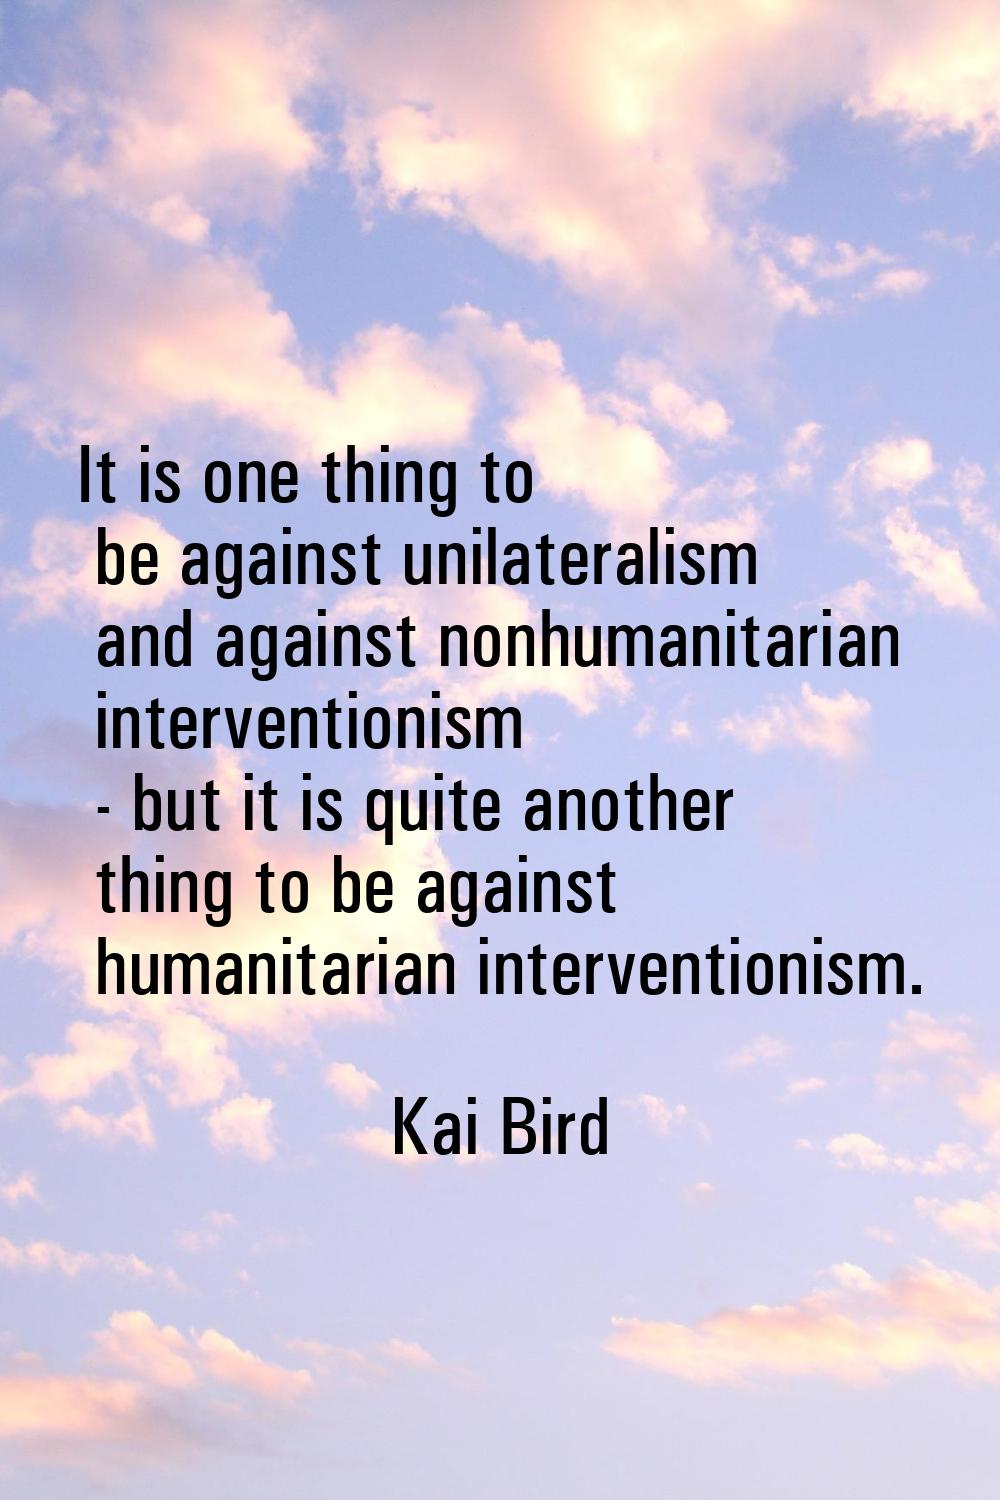 It is one thing to be against unilateralism and against nonhumanitarian interventionism - but it is